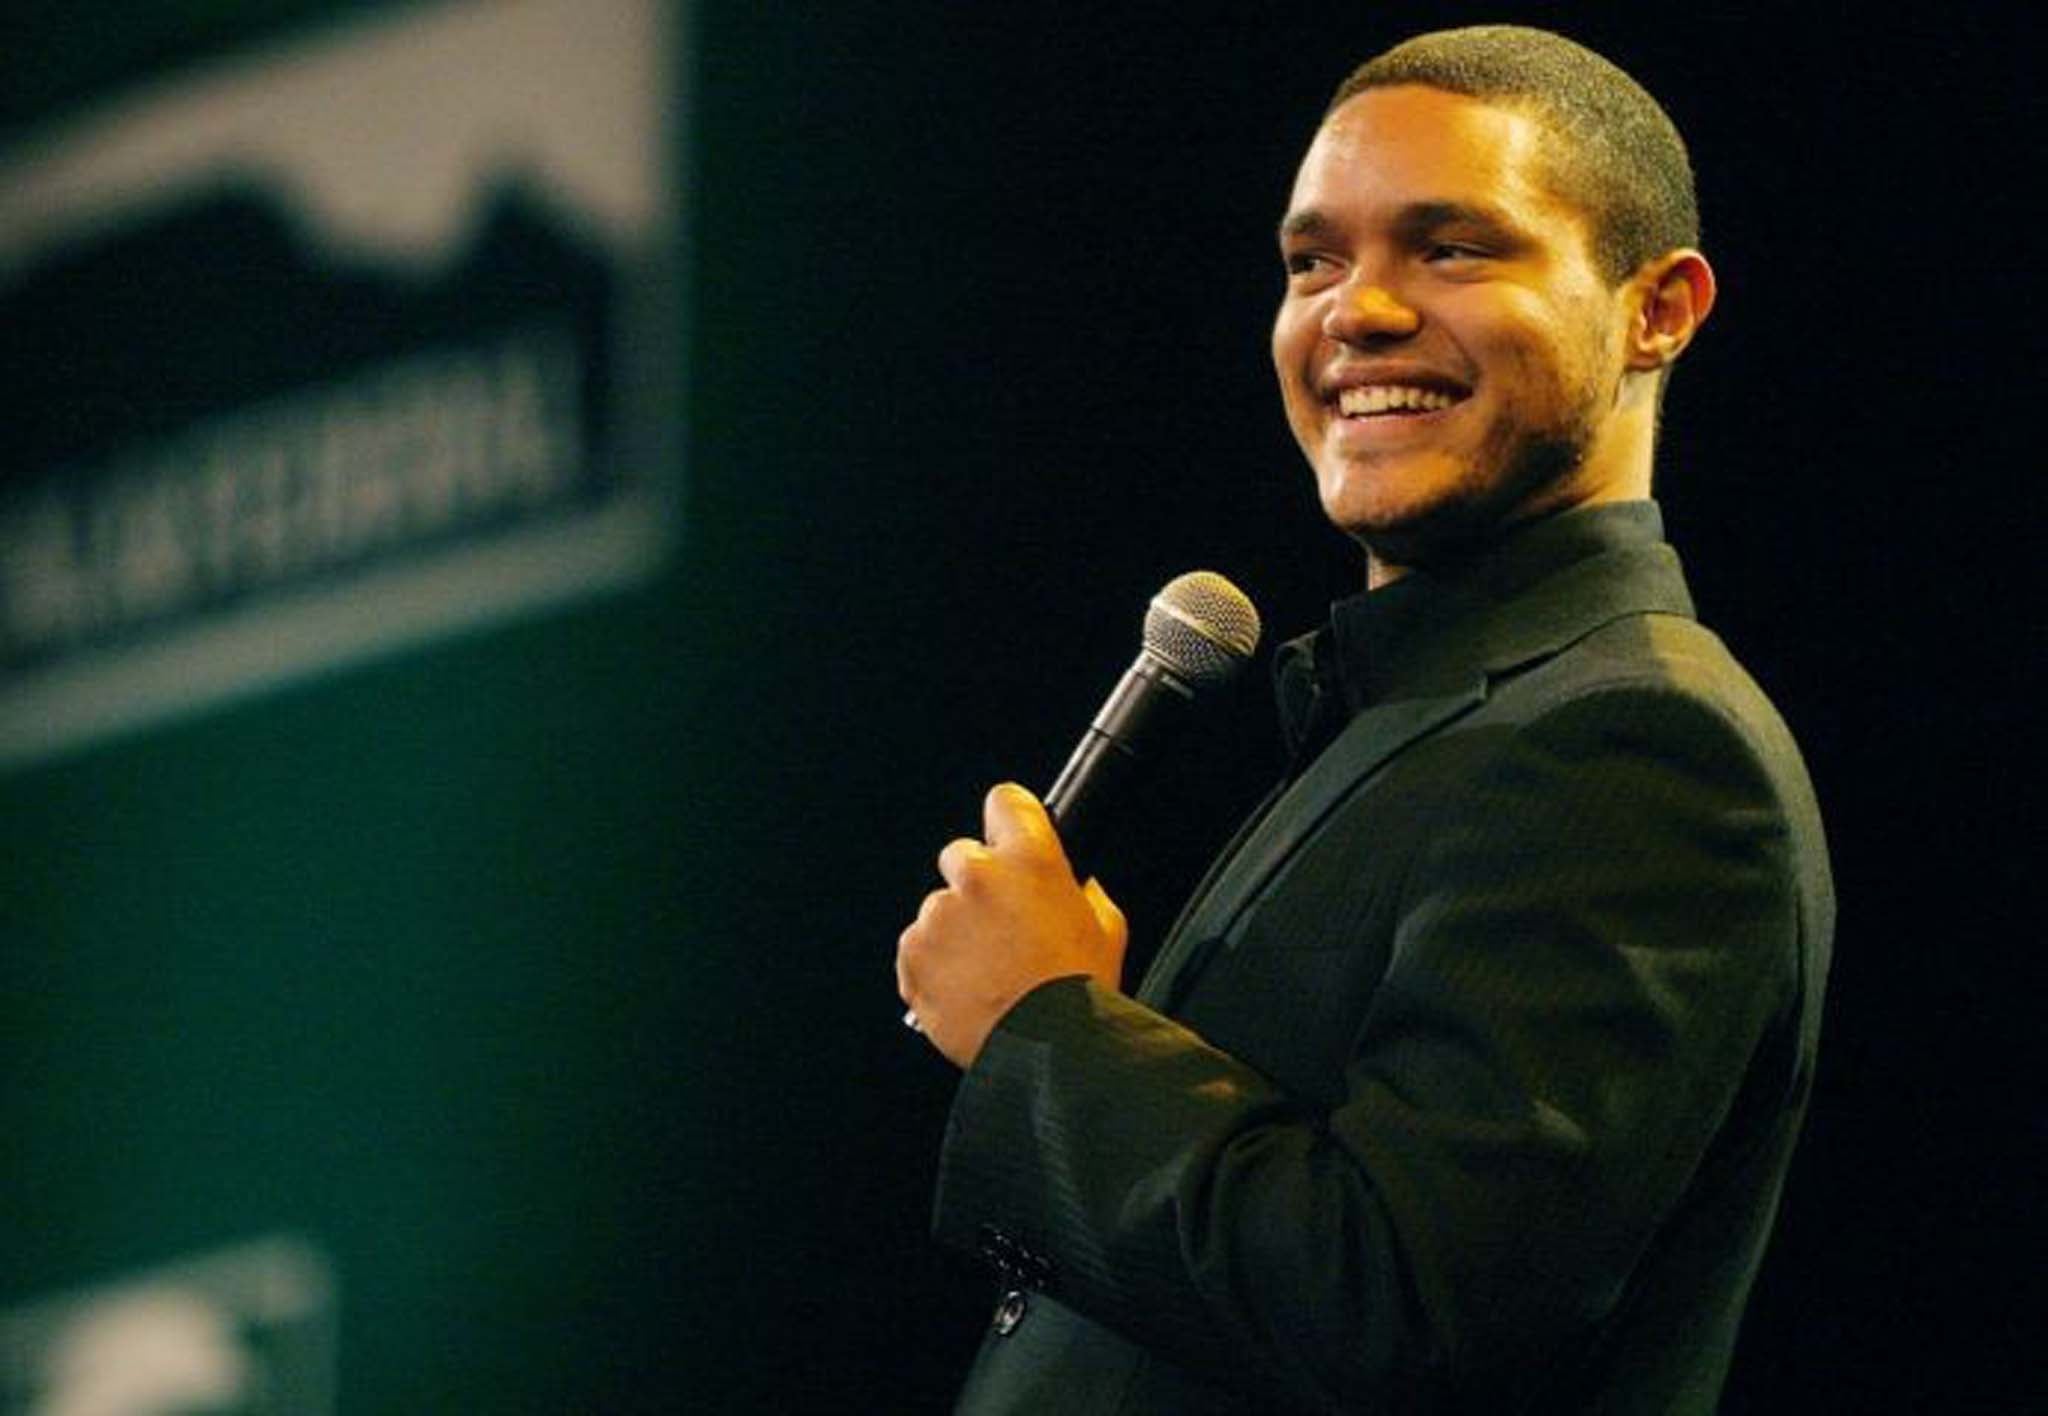 Trevor Noah performs live on stage in South Africa